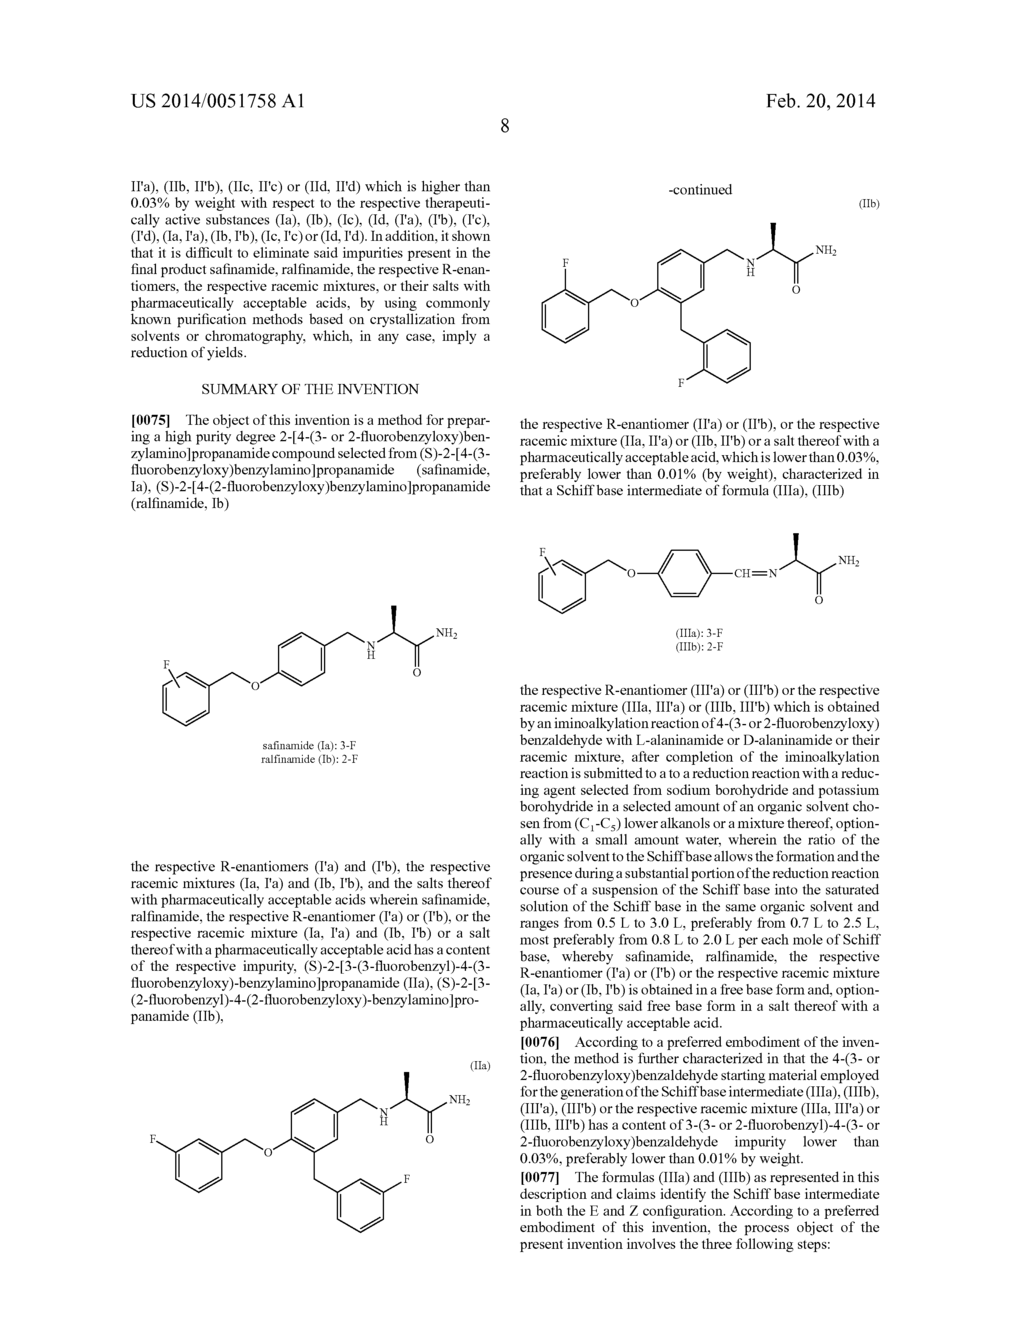 HIGH PURITY 2-[4-(3- OR 2-FLUOROBENZYLOXY)BENZYLAMINO] PROPANAMIDES AND     METHODS OF USE THEREOF - diagram, schematic, and image 11